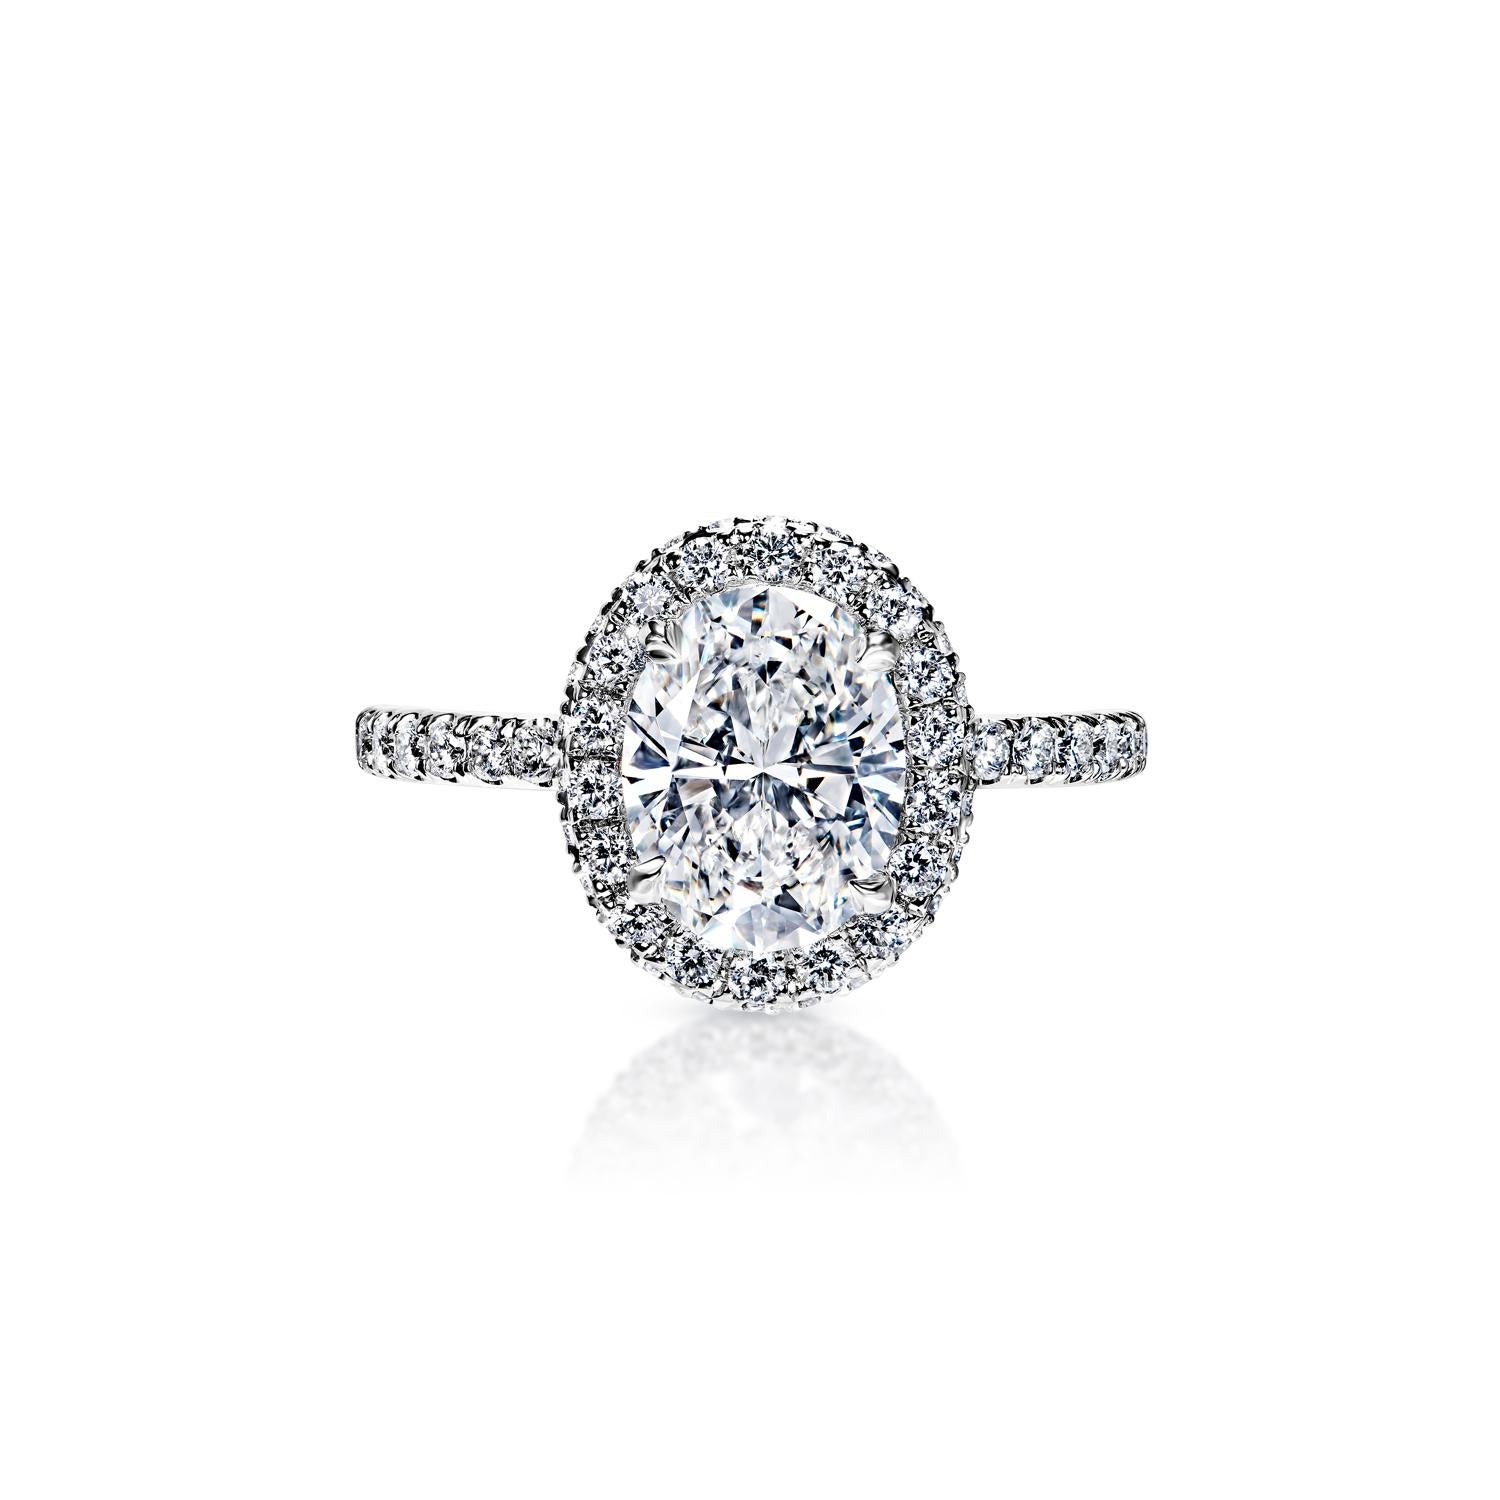 Adriana 2 Carat E SI1 Oval Cut Diamond Engagement Ring in 18k White Gold By Mike Nekta 

 


Center Diamond:

Carat Weight: 1.55 Carat
Color : E
Clarity: SI1
Style: Oval Cut

Ring:
Settings: Halo, Sidestone, French V Split, 4 Petite Claw